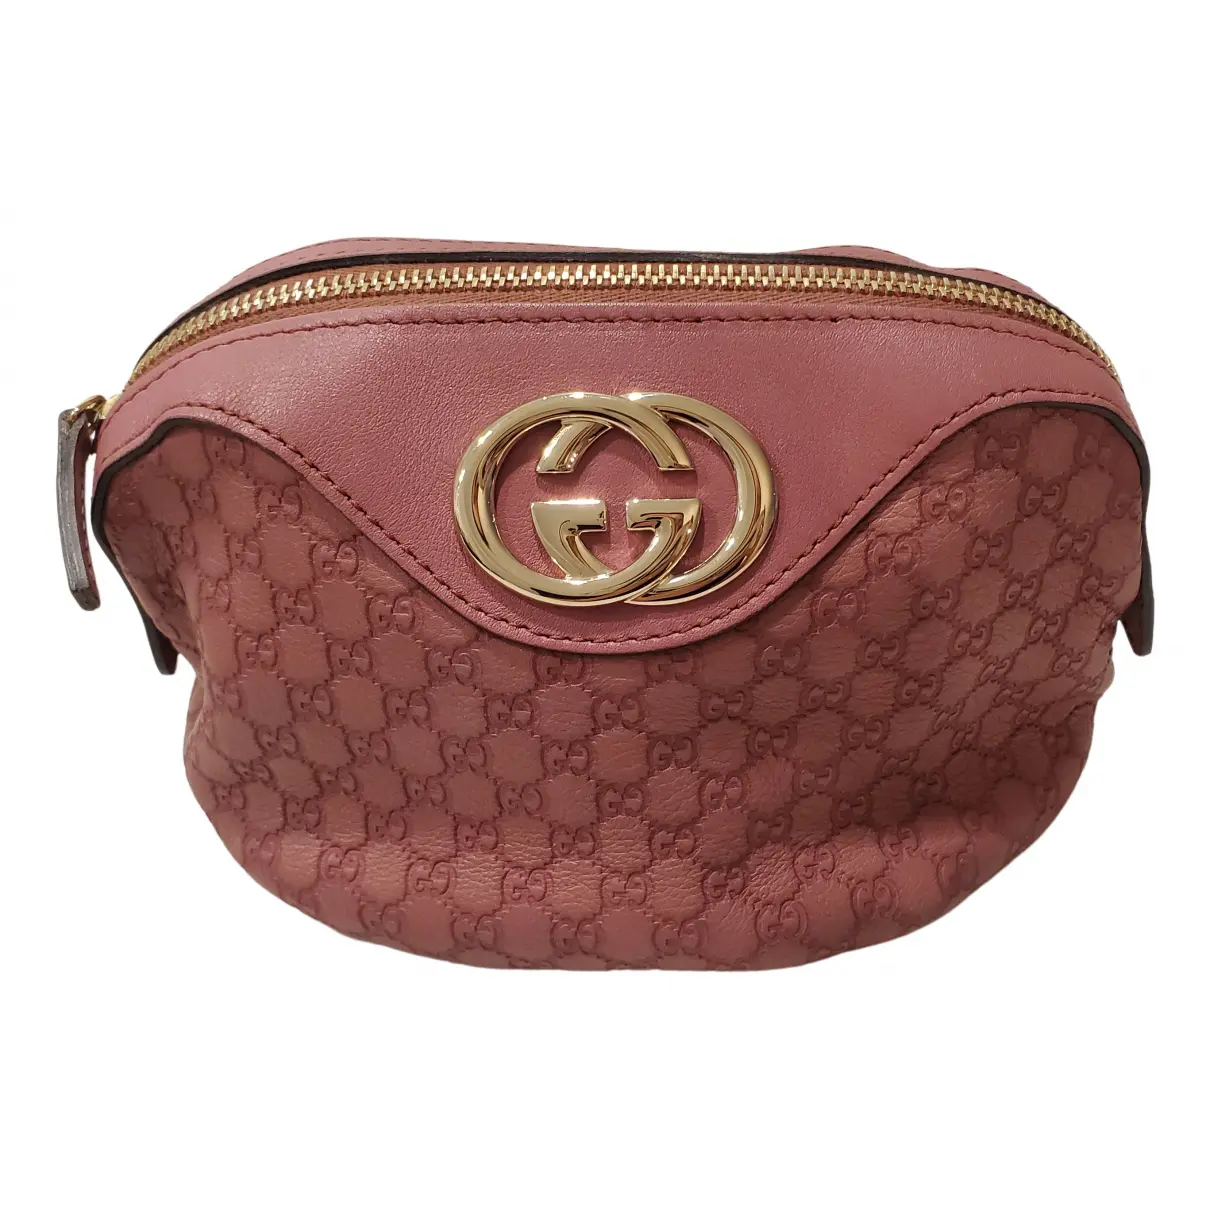 Marmont leather purse Gucci